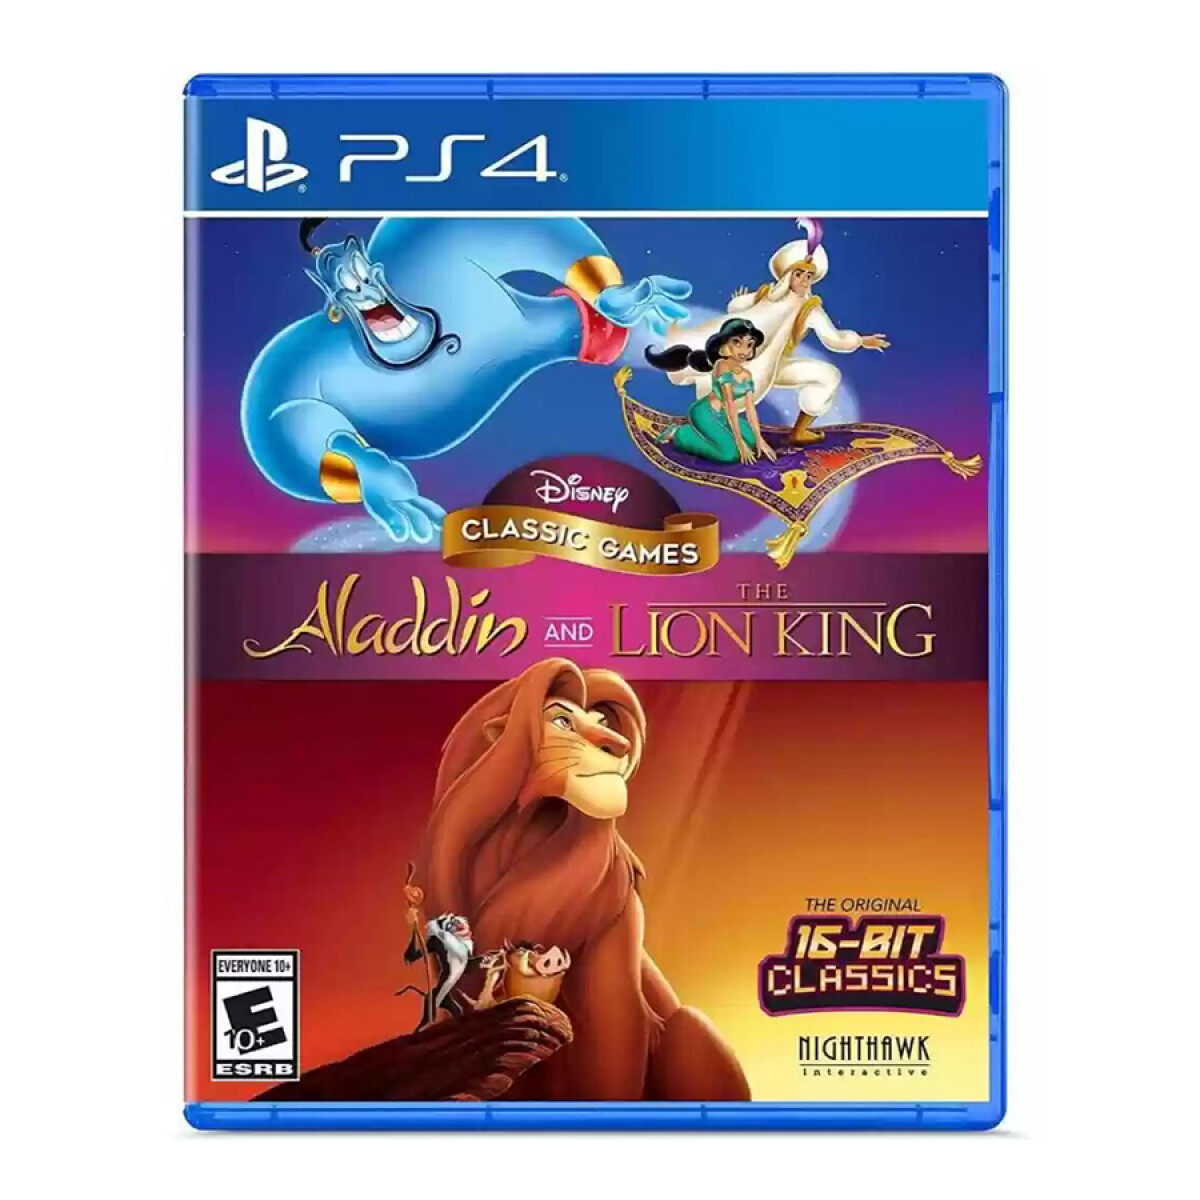 Disney Classic Games: Aladdin and The Lion King - PS4 